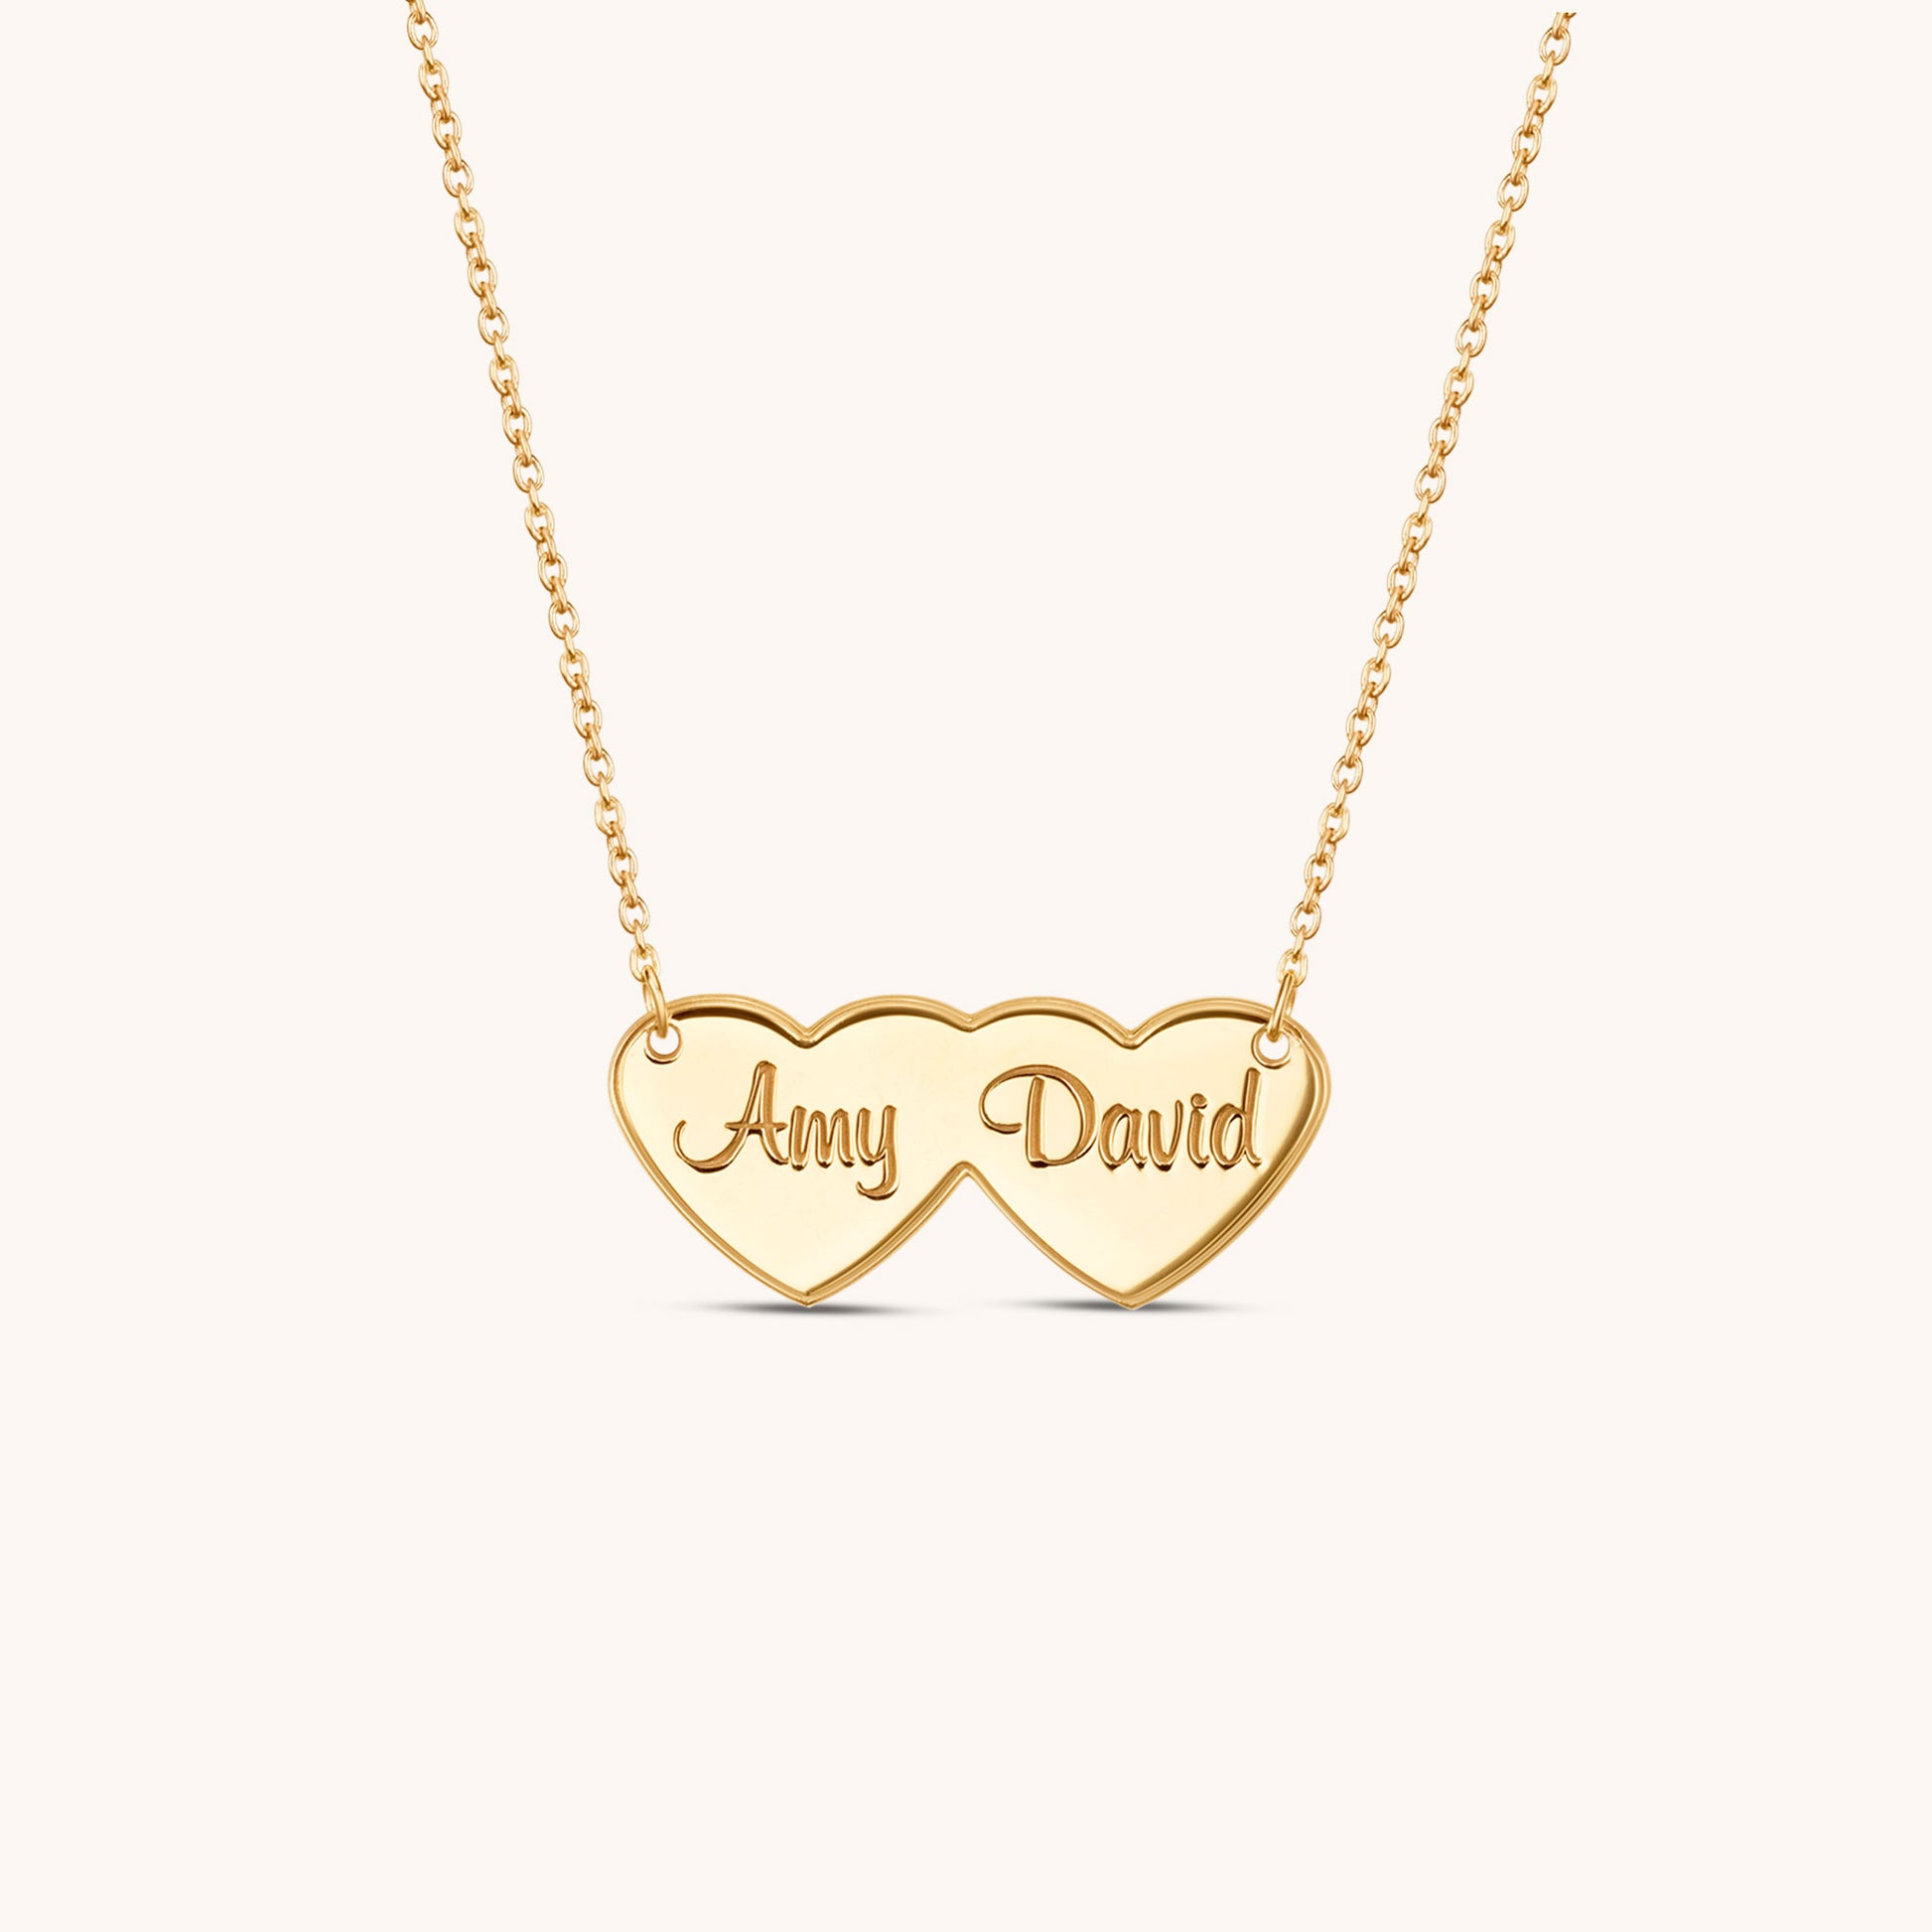 Personalized Double Heart Two Name Necklace - Keepsakes